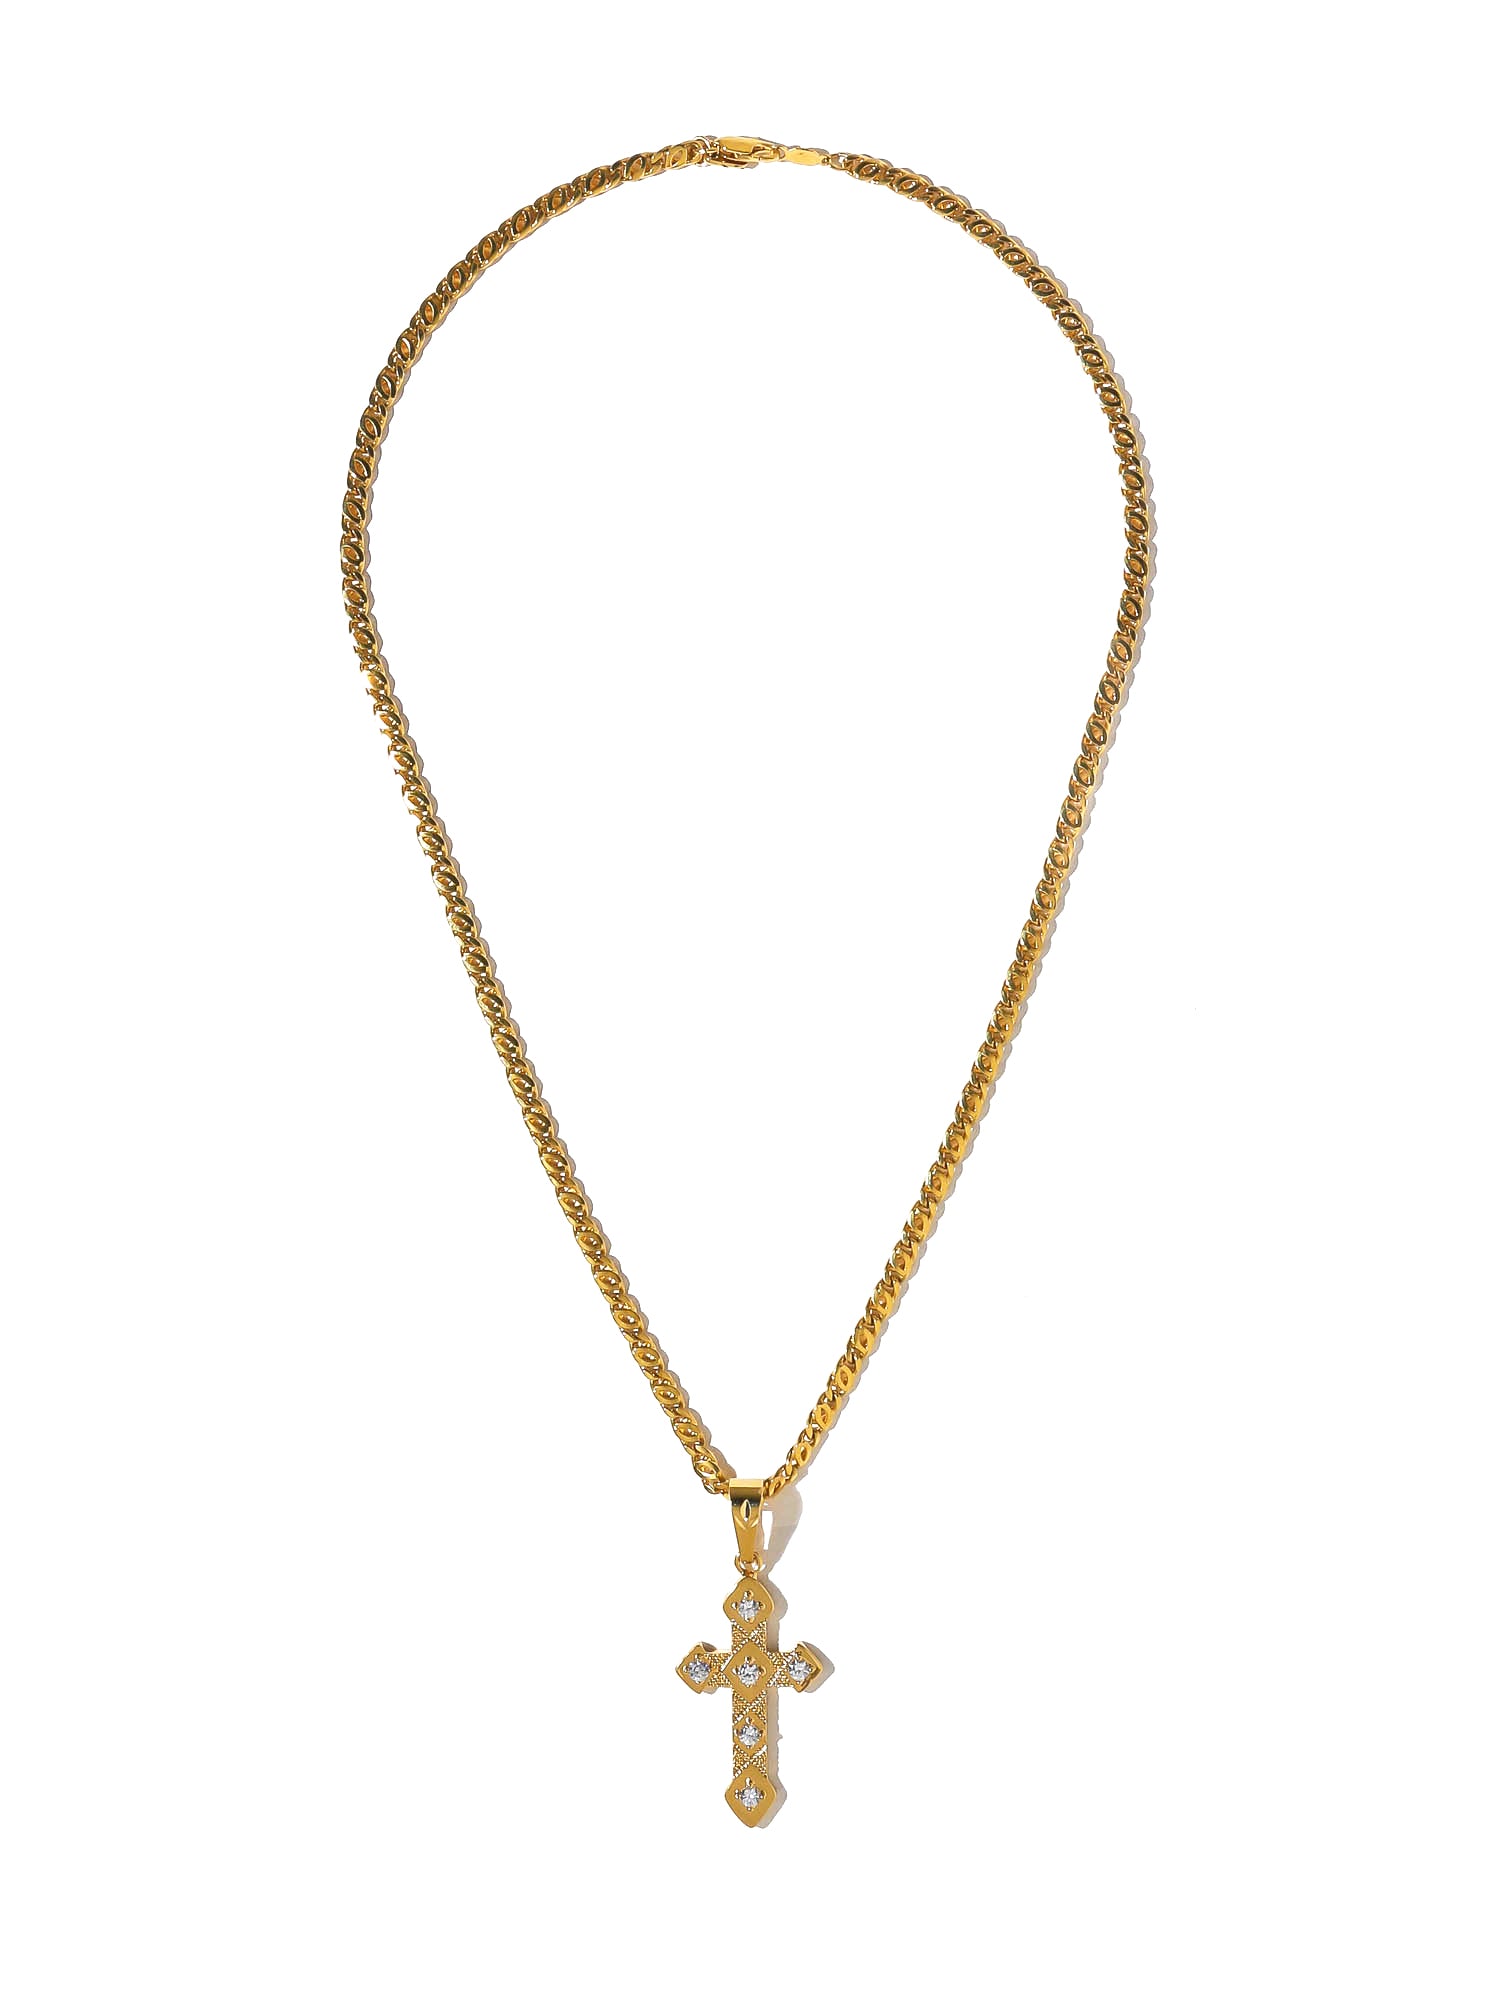 The Angel Cross Necklace